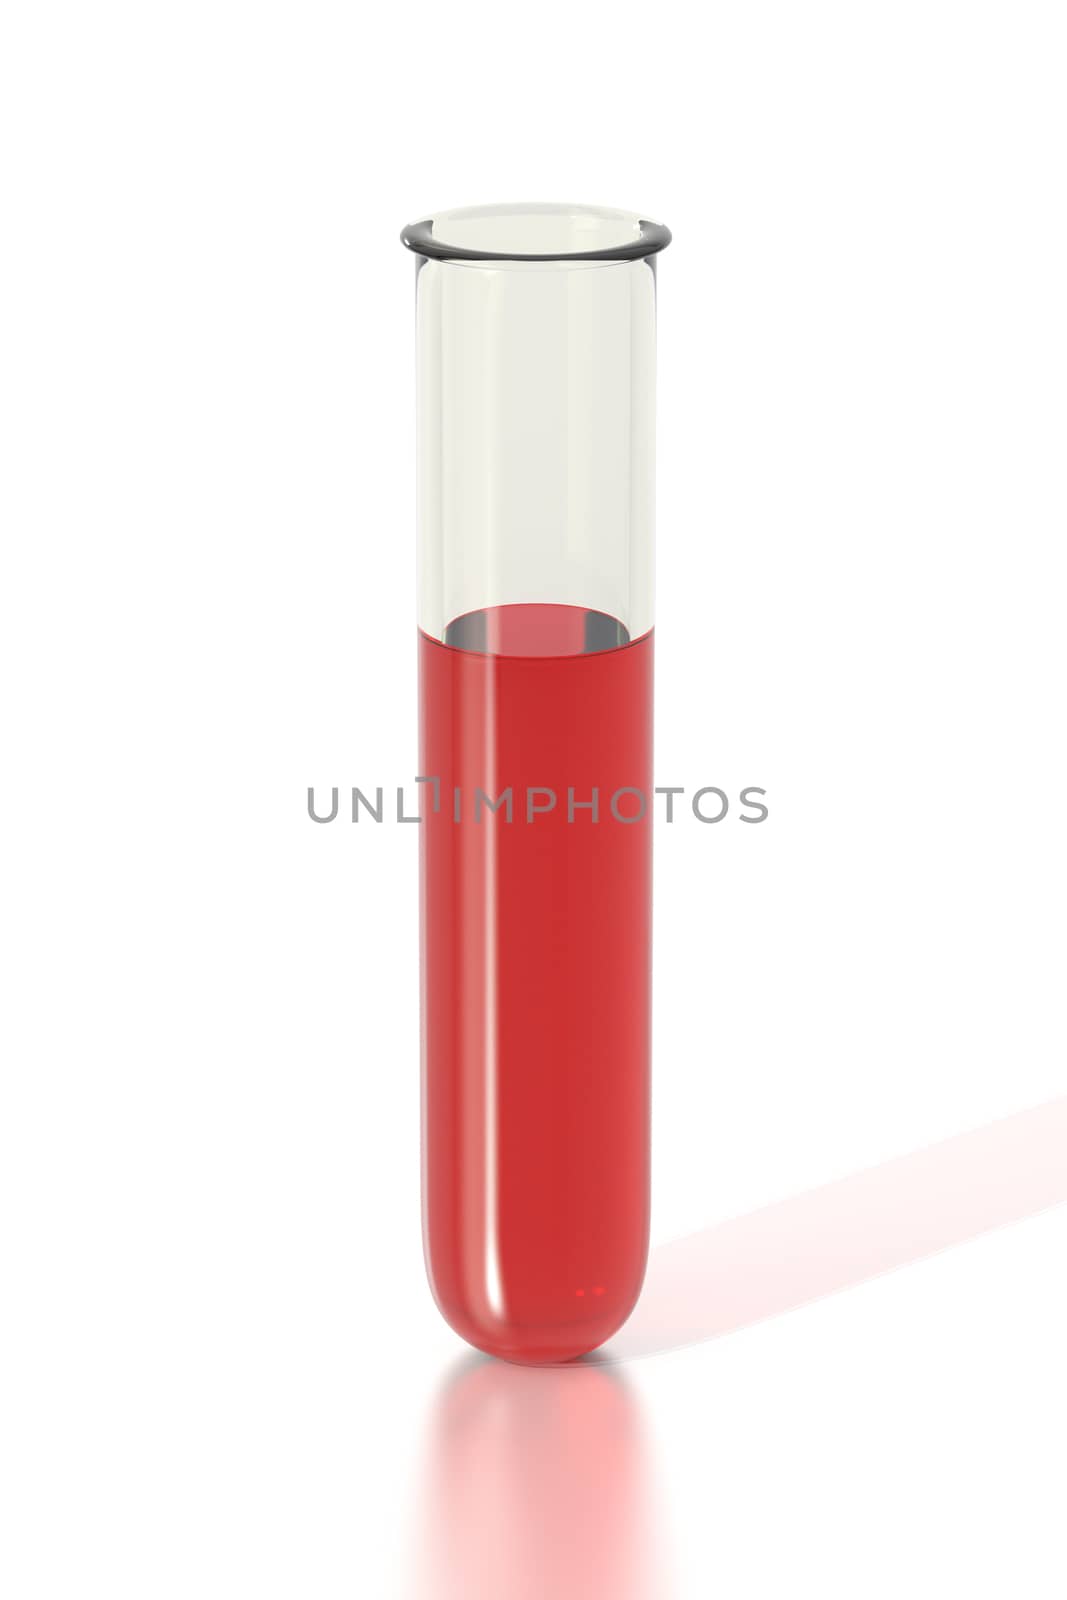 Test tube with red liquid